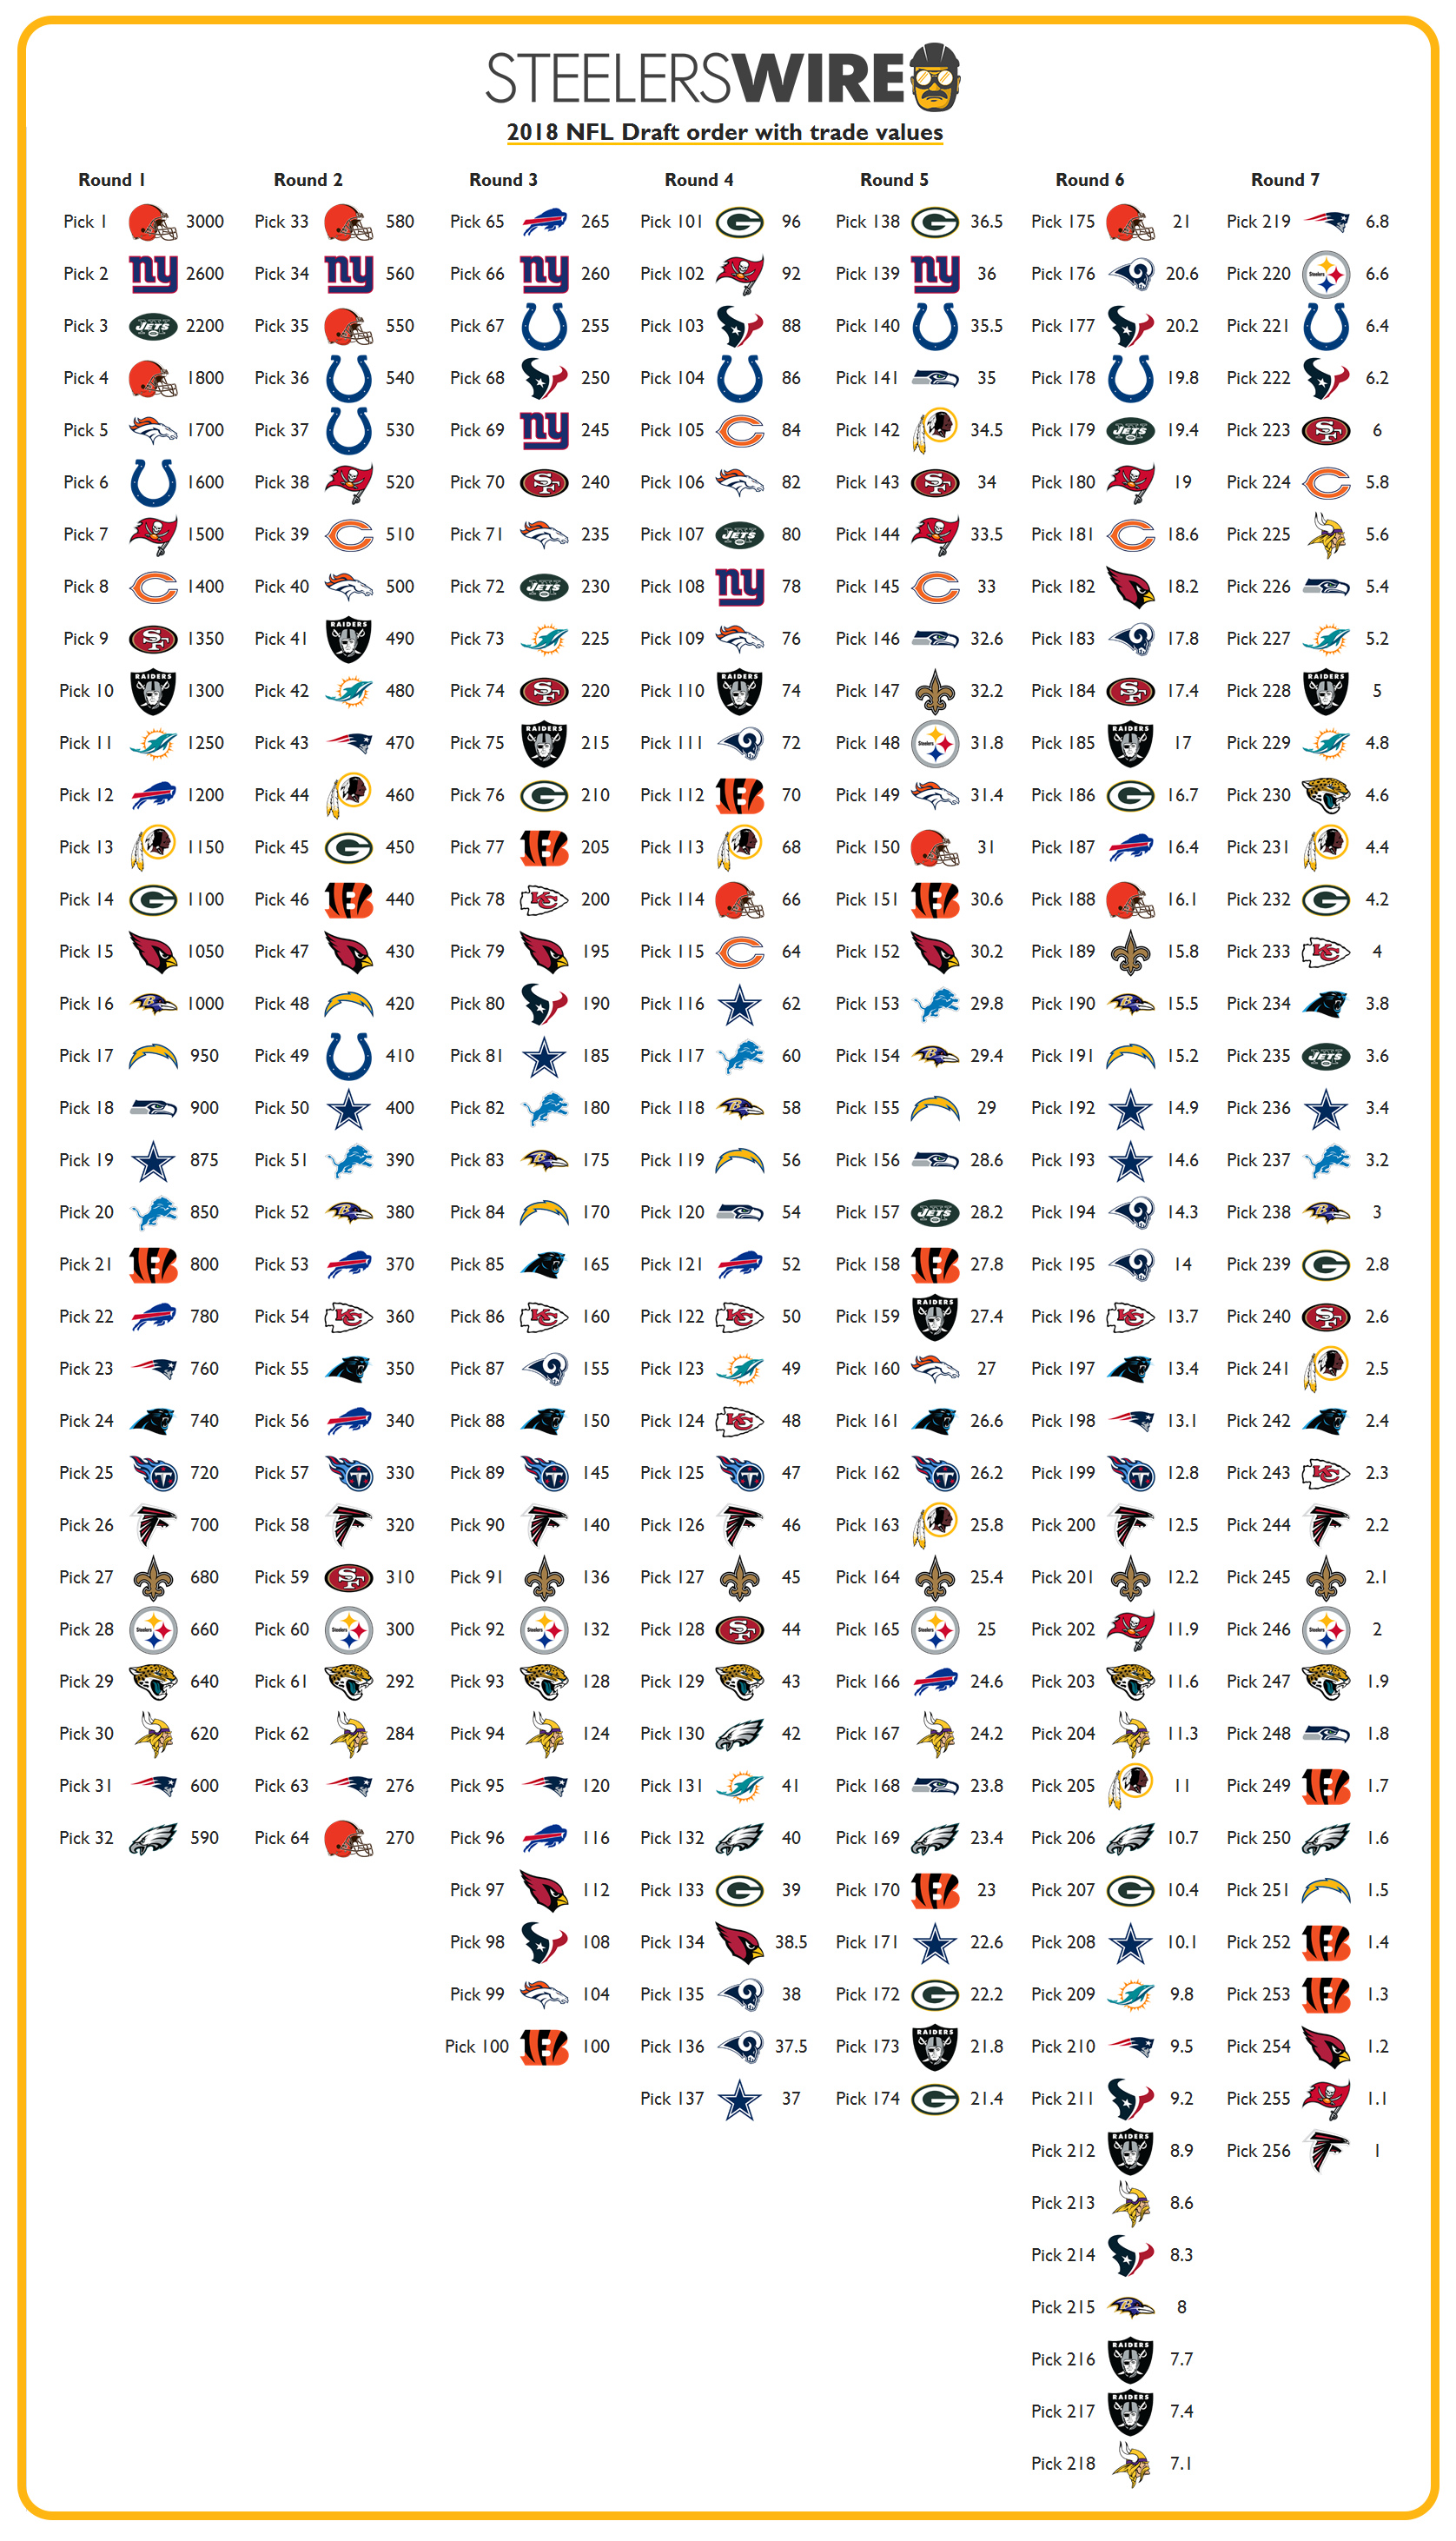 Updated 2018 NFL draft order with trade values